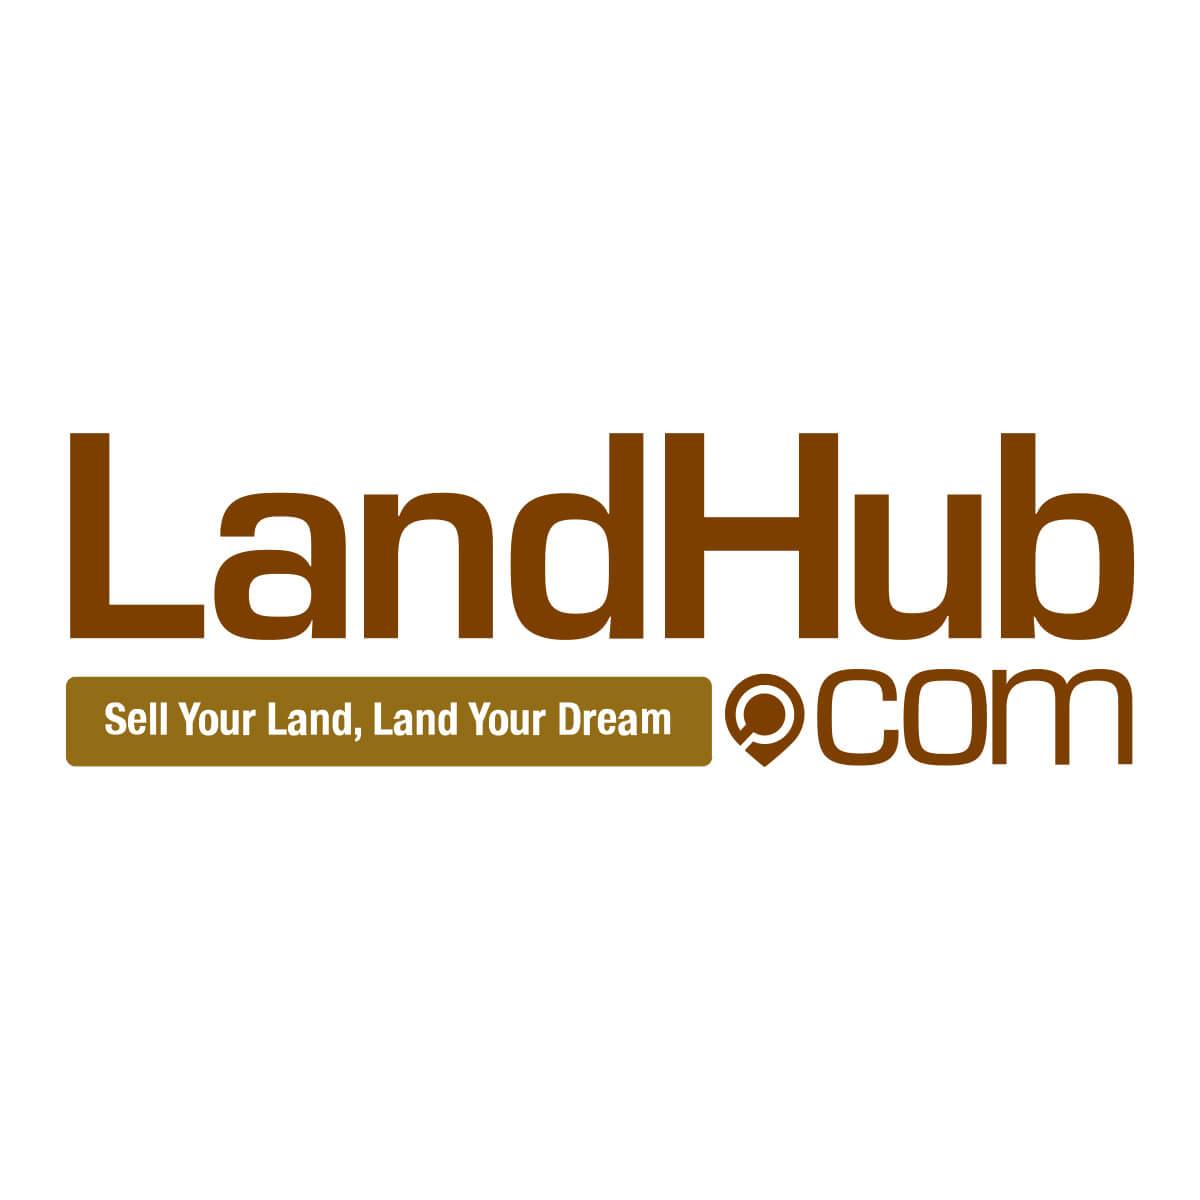 would free land spur your interest in homesteading?